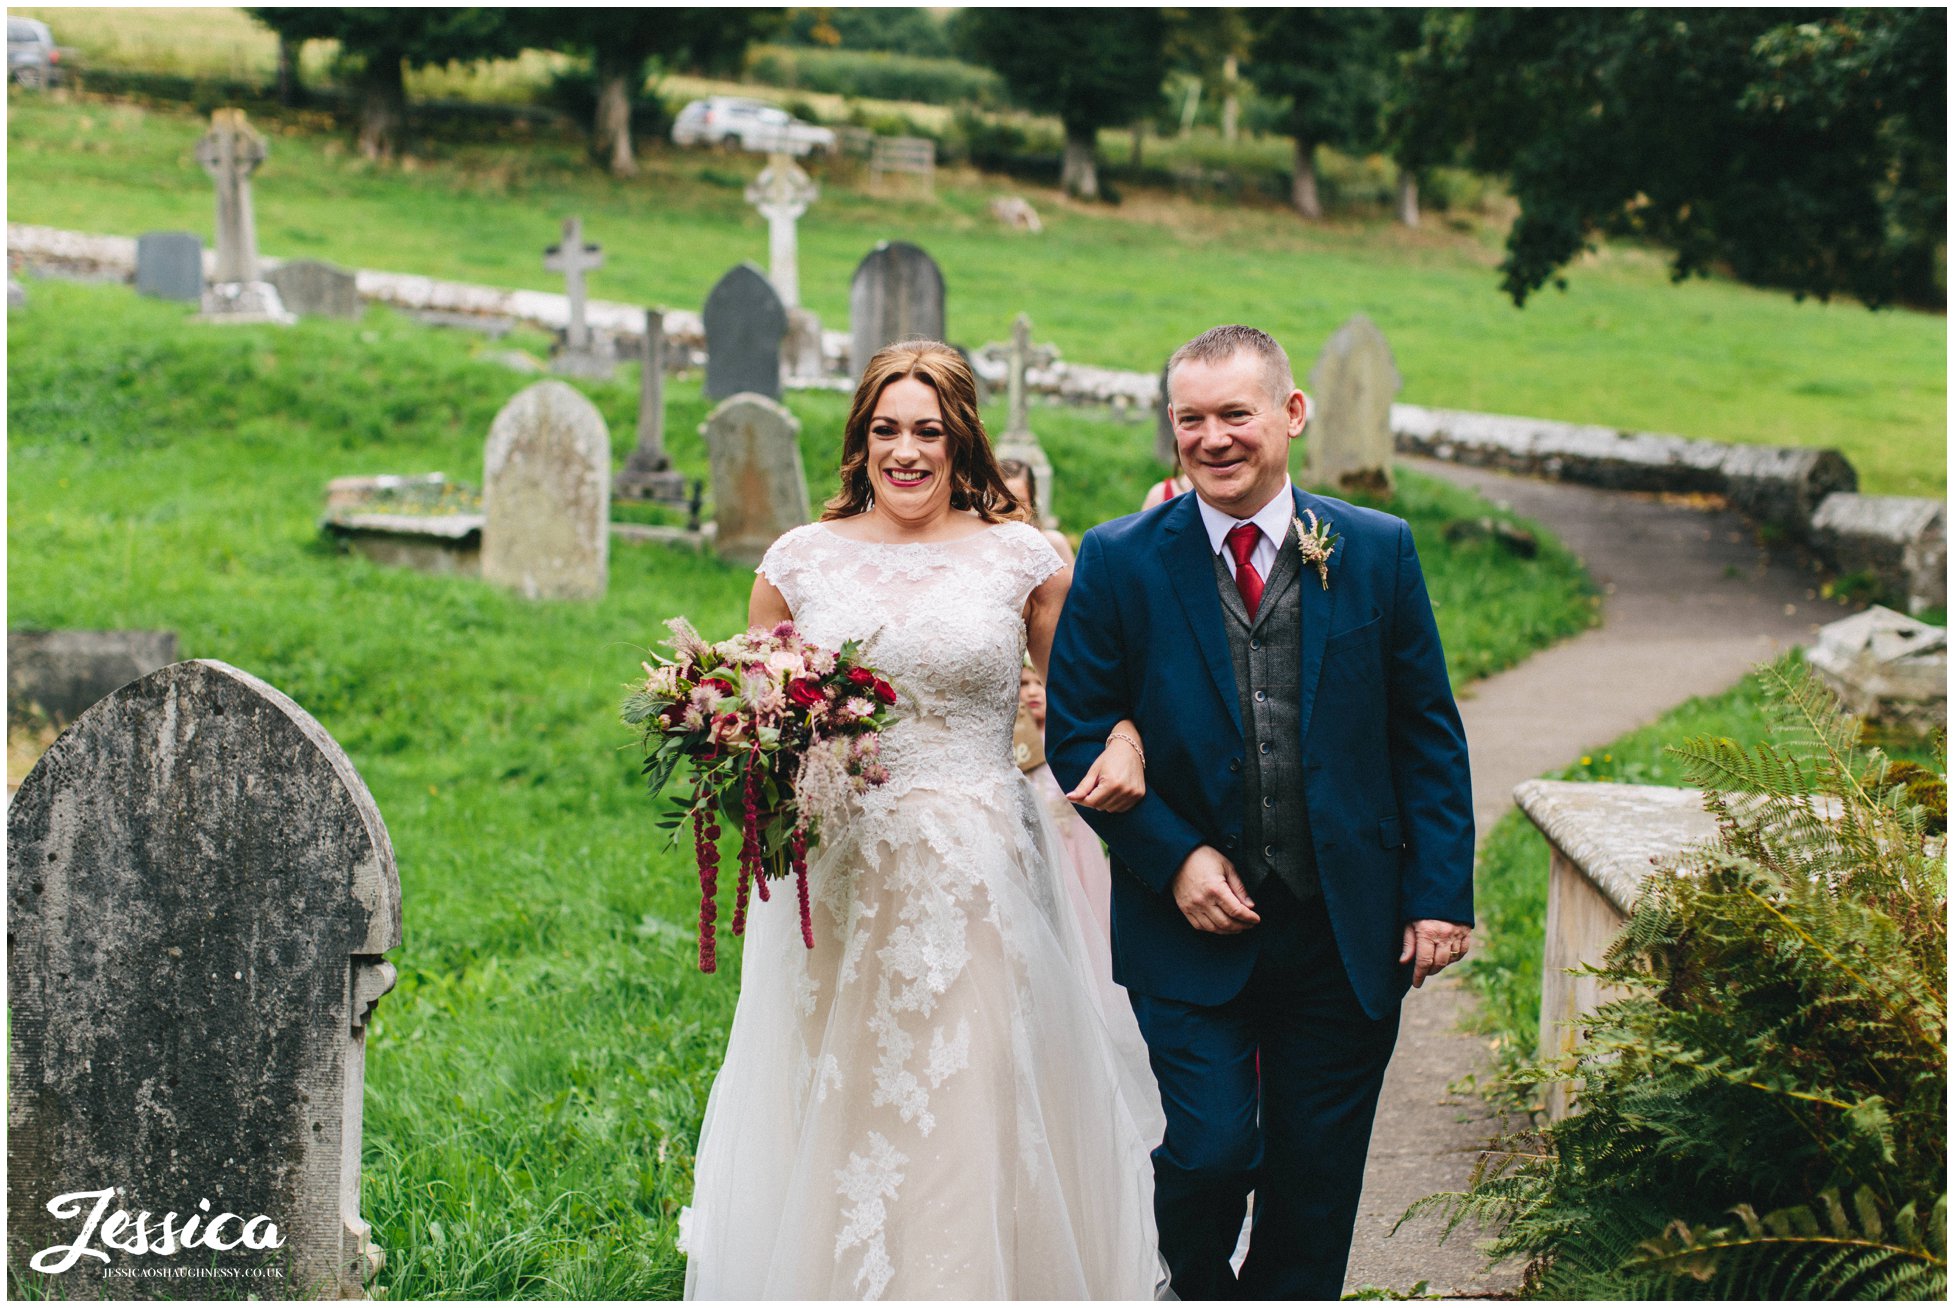 the bride and her father walk to the church entrance 